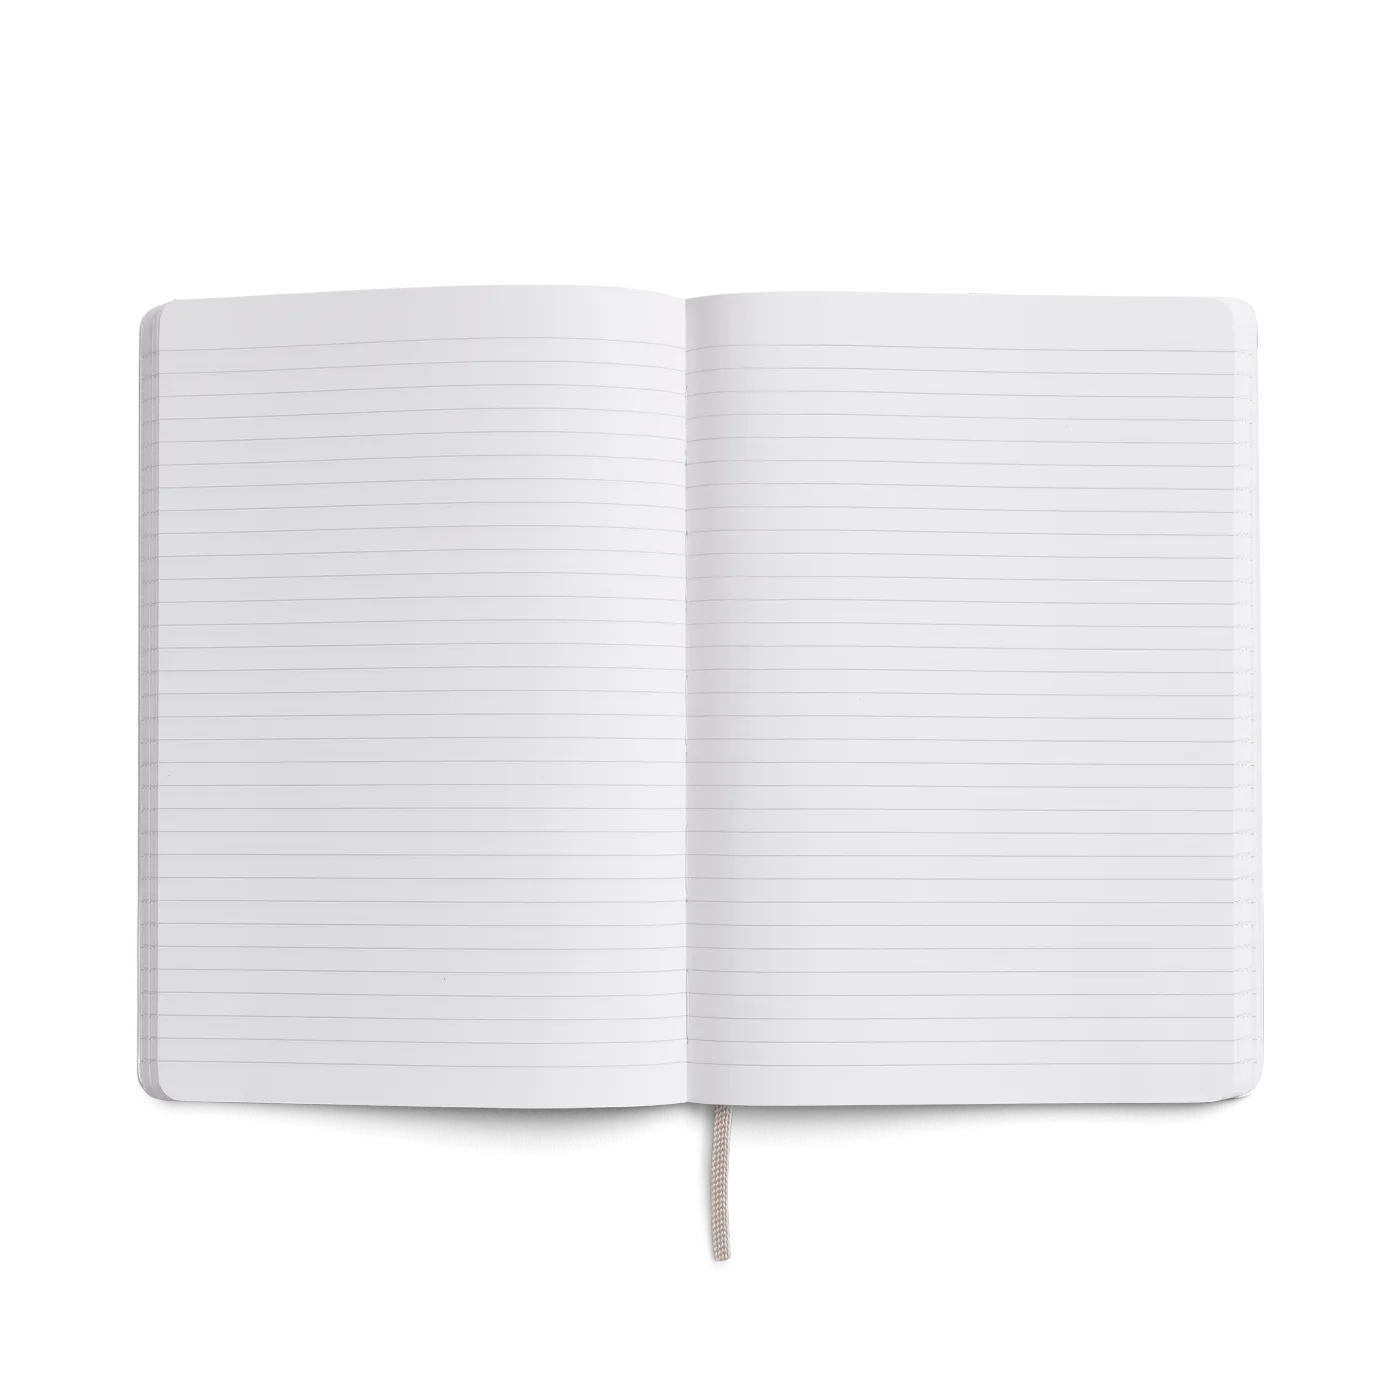 Karst Notebook A5 Softcover - Forest (Lined)